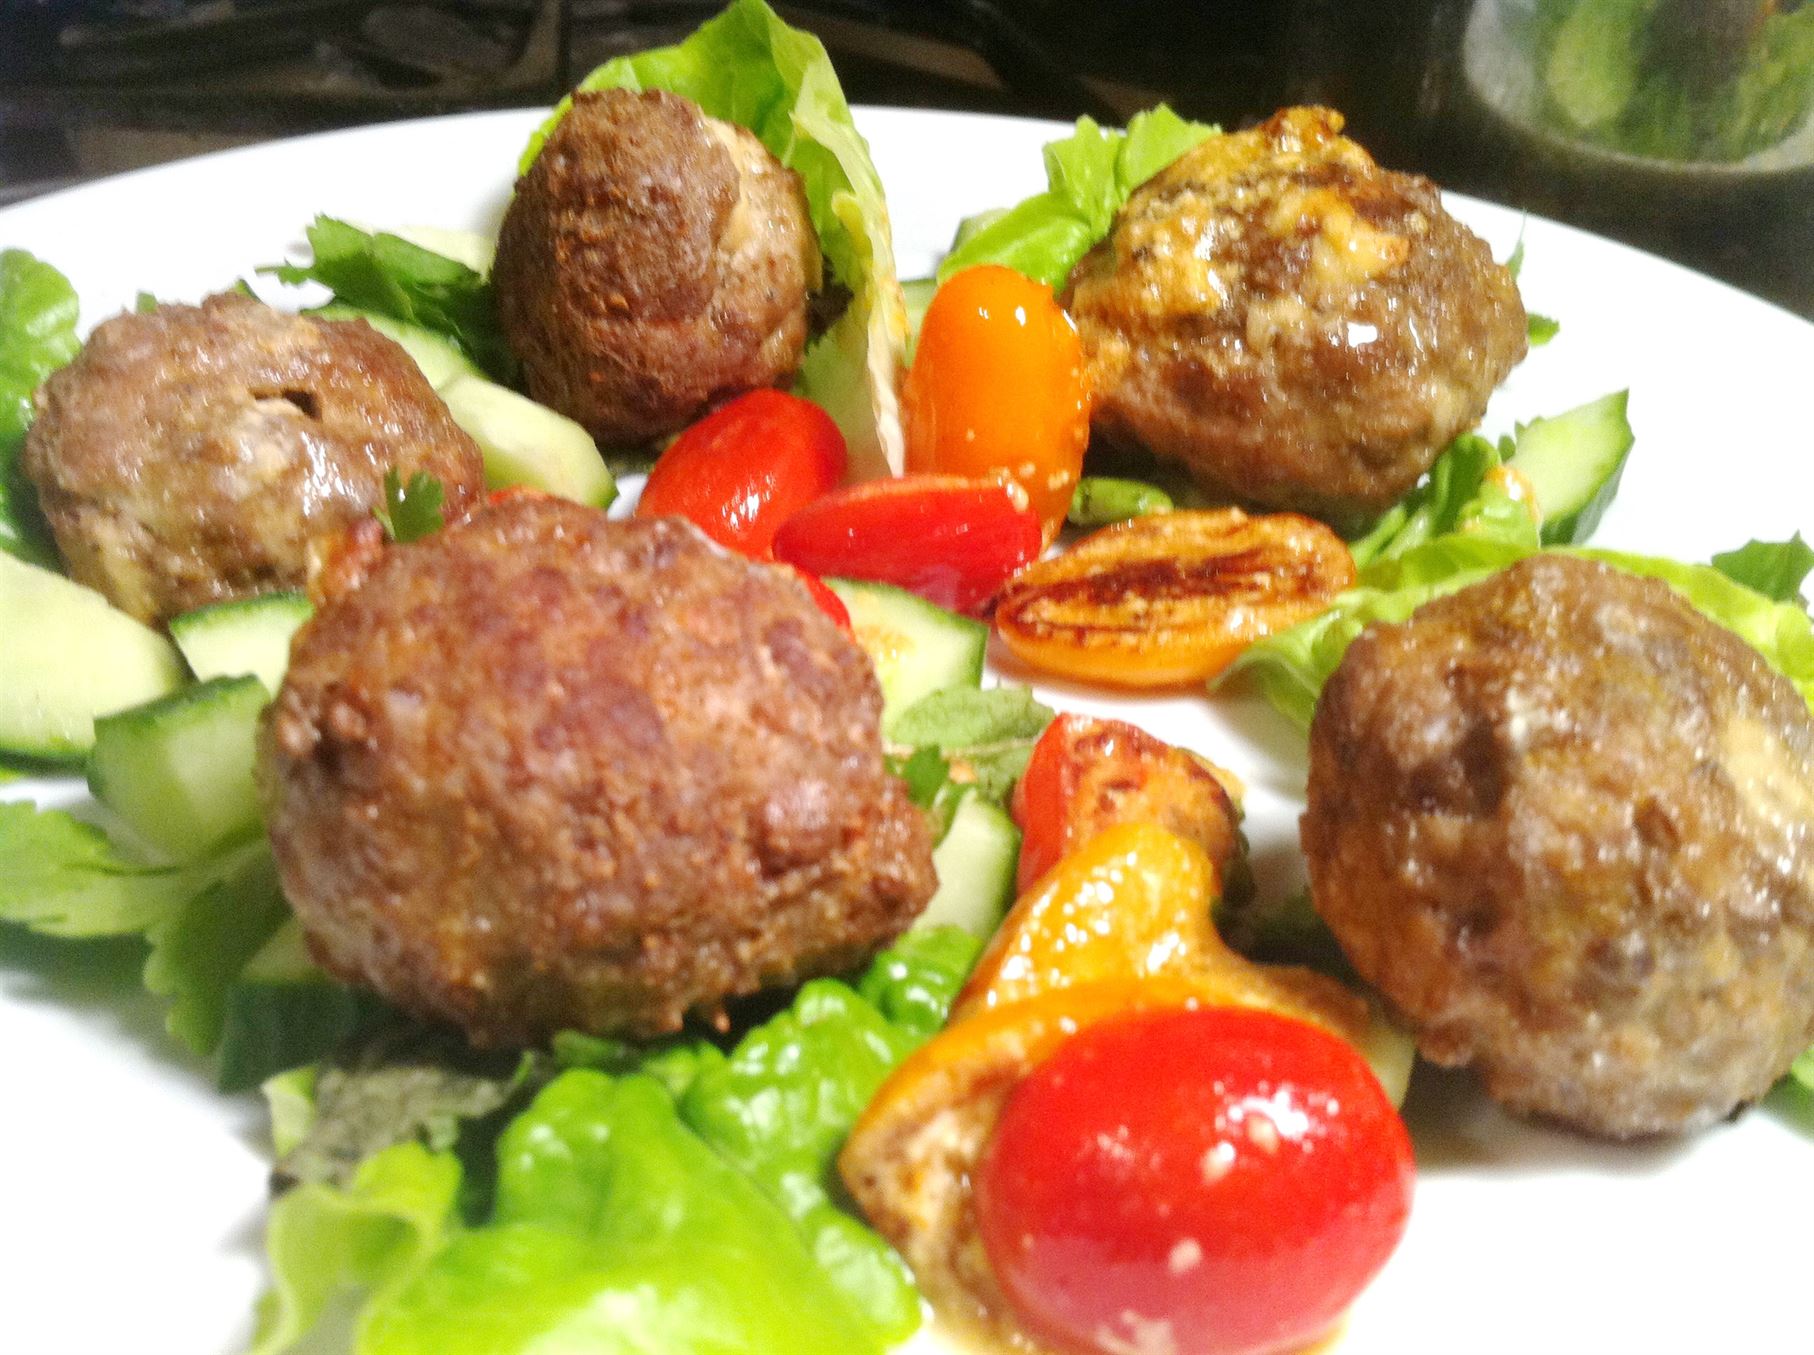 Cream Cheese-Stuffed Spicy Meatballs with Tomato Salad, Lay The Table